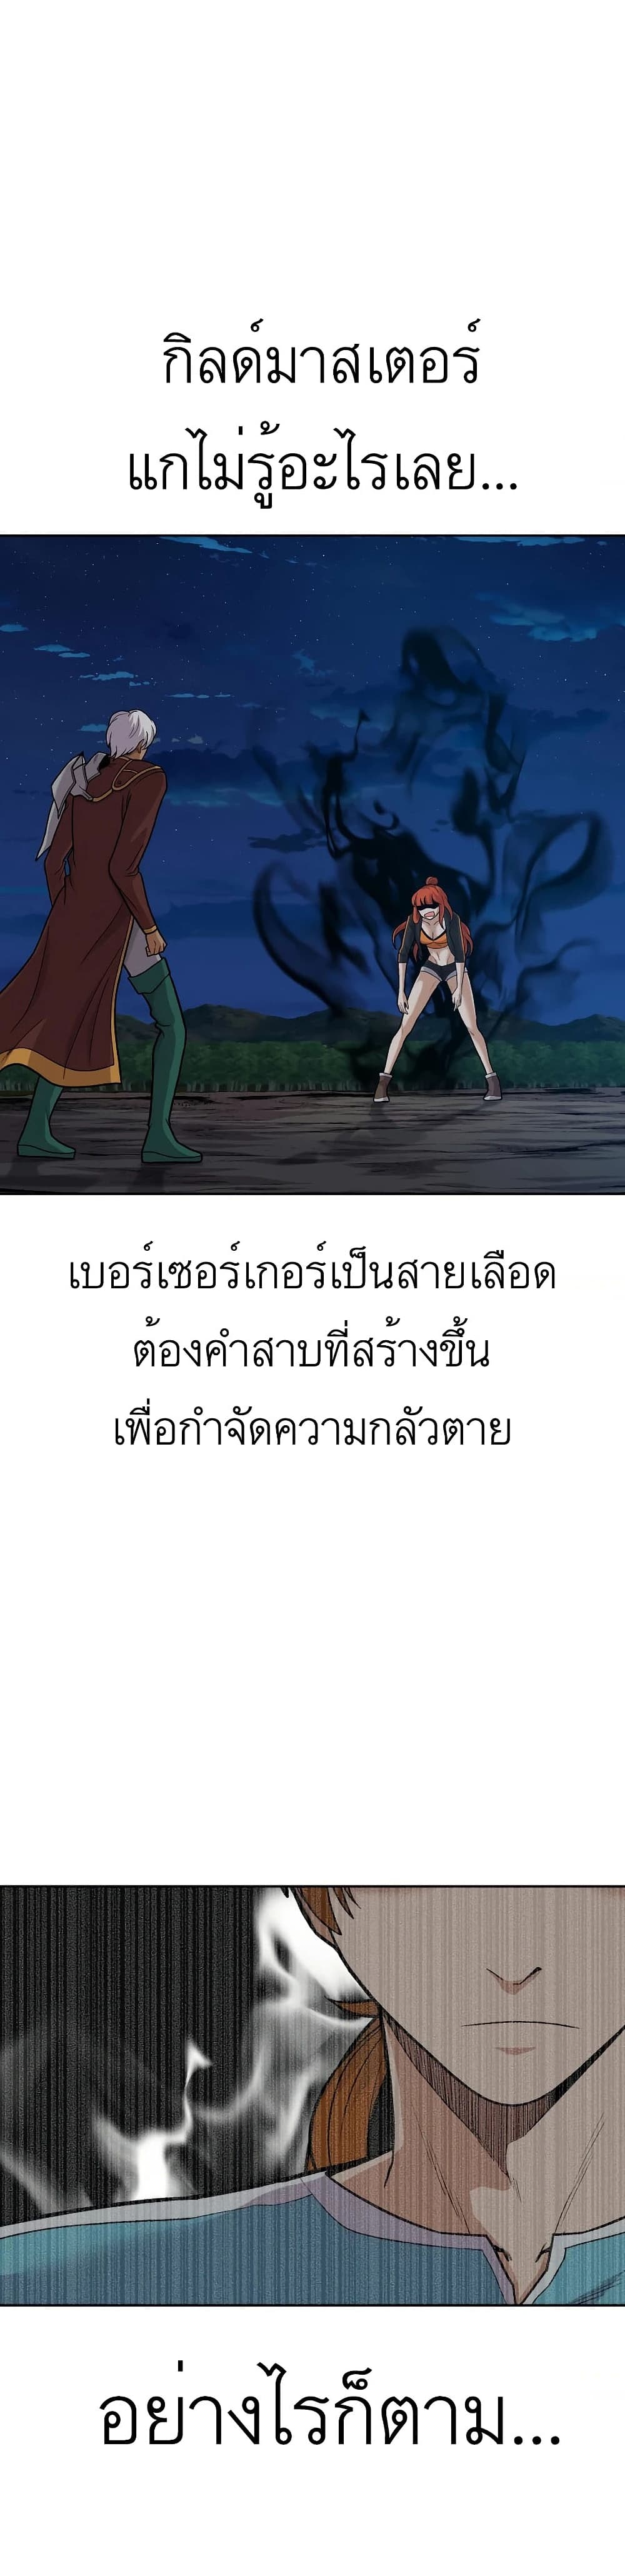 Raising Newbie Heroes In Another World ตอนที่ 16 (9)